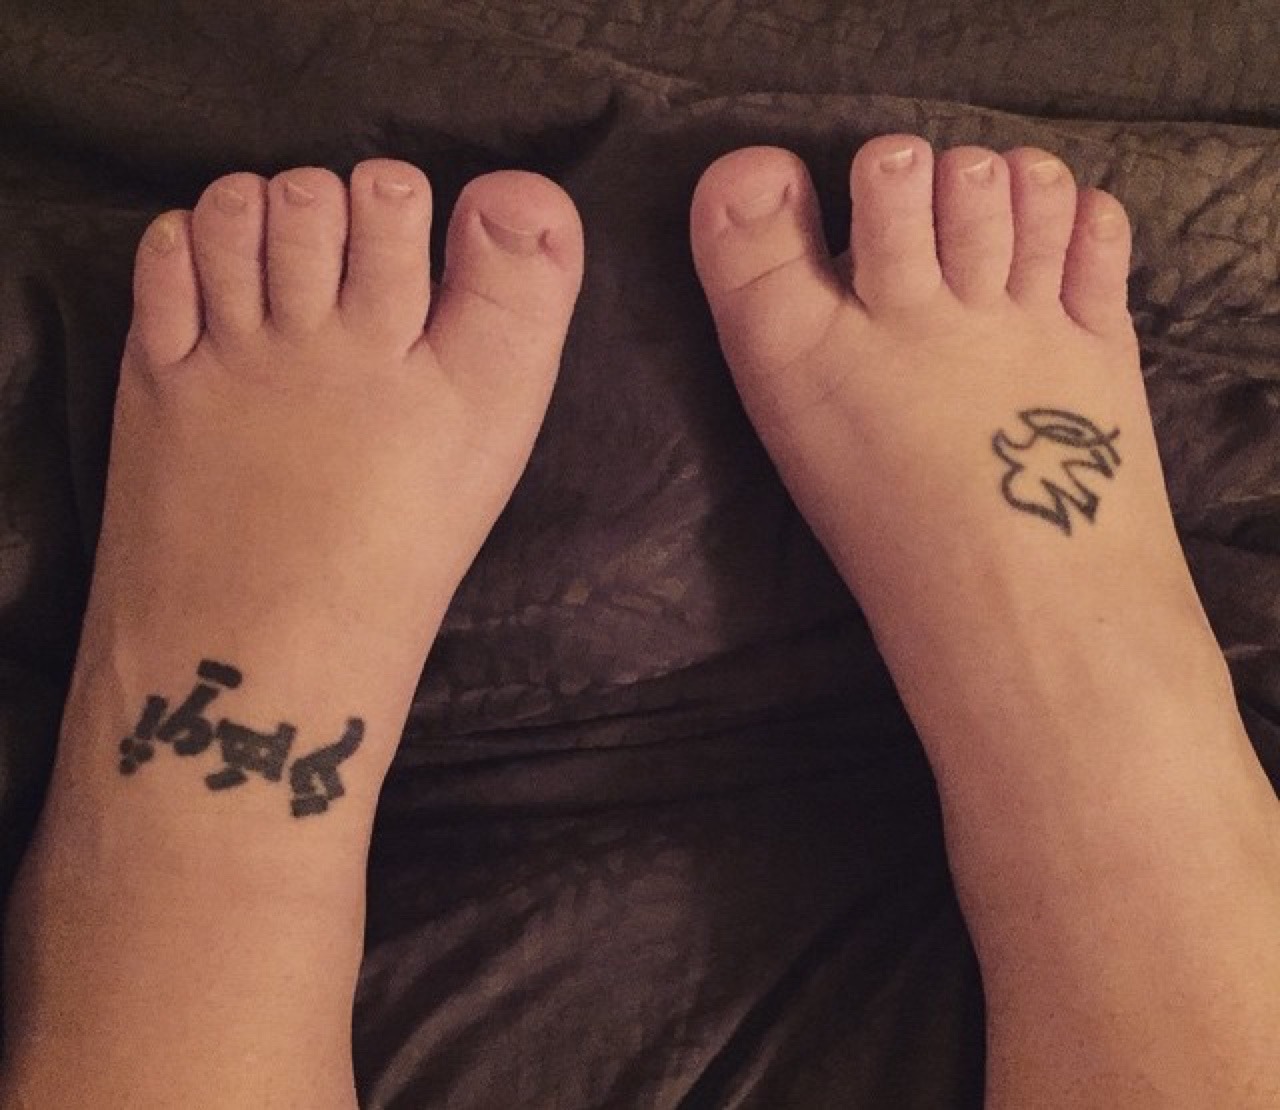 Pictures of fat feet